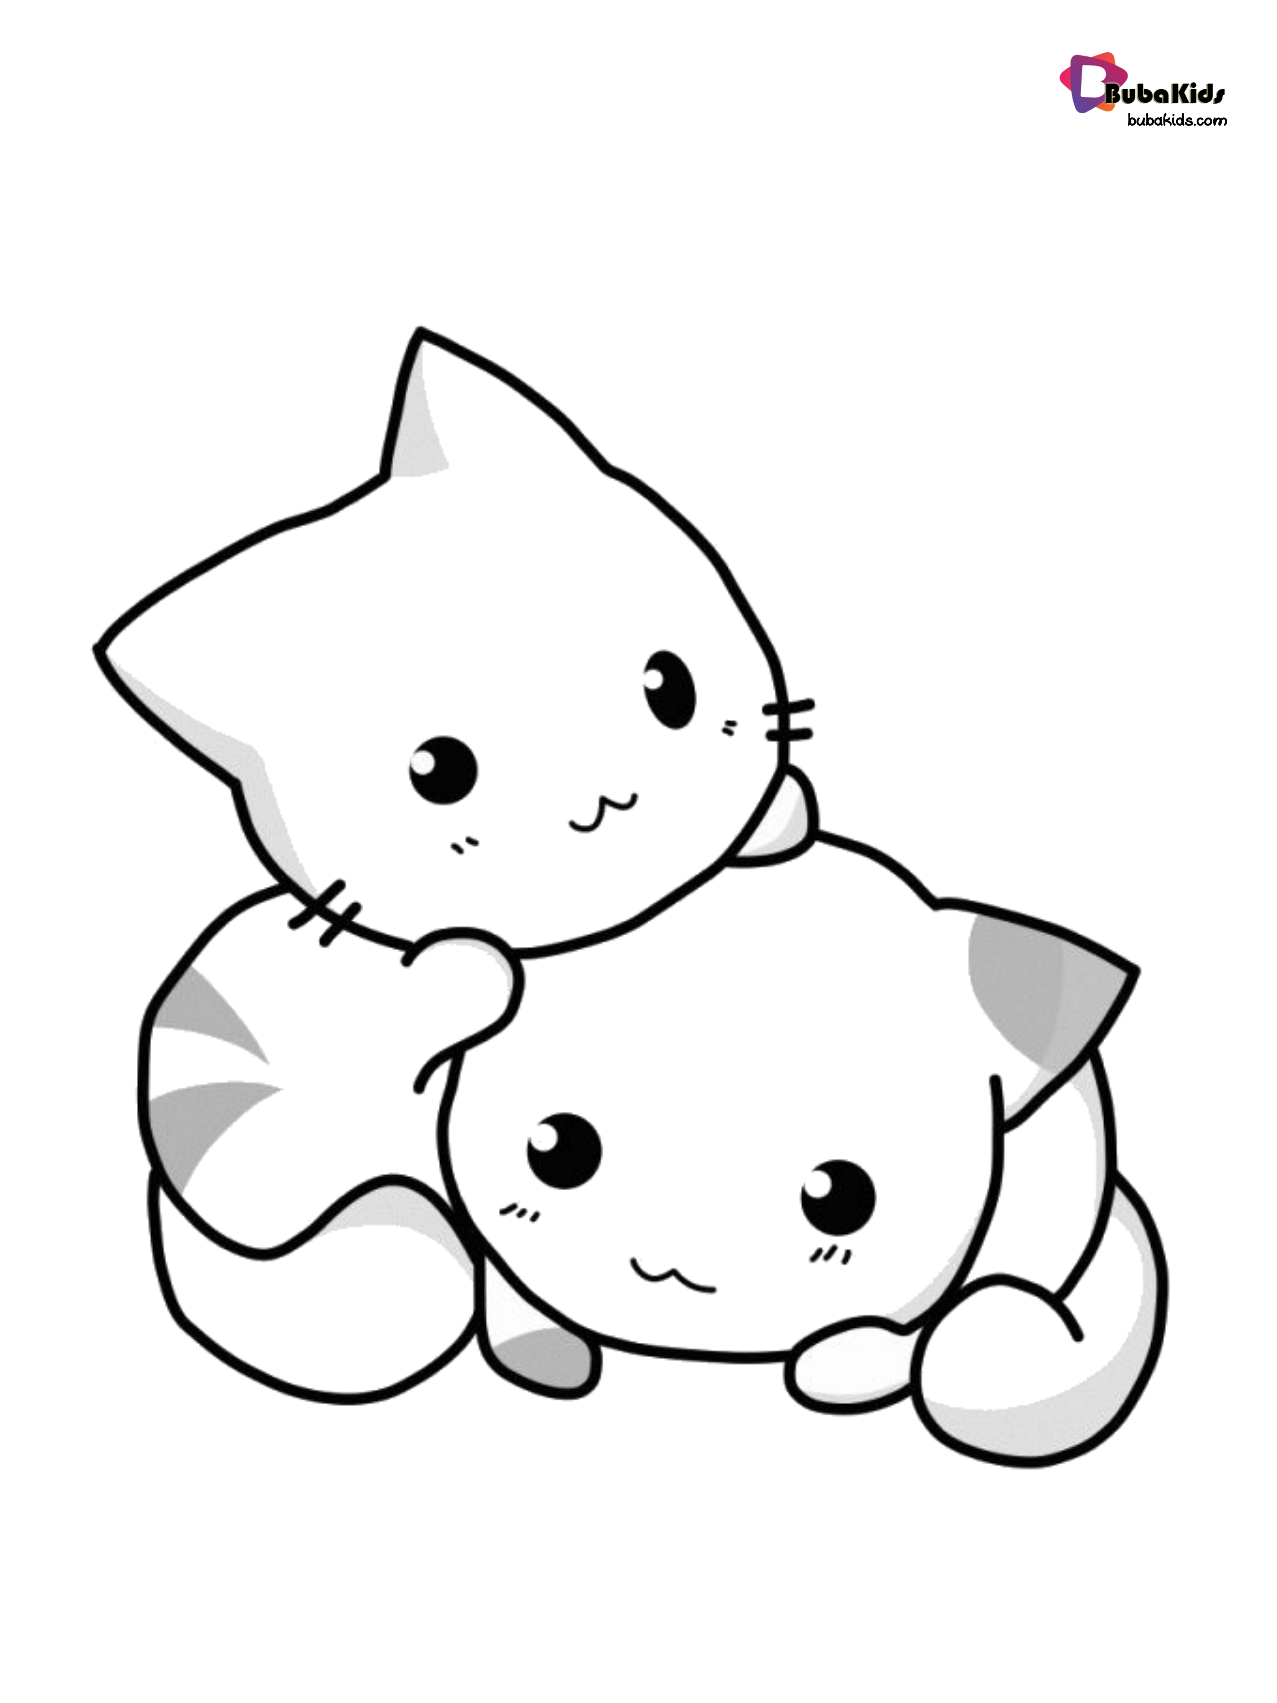 Cute kittens coloring pages Wallpaper